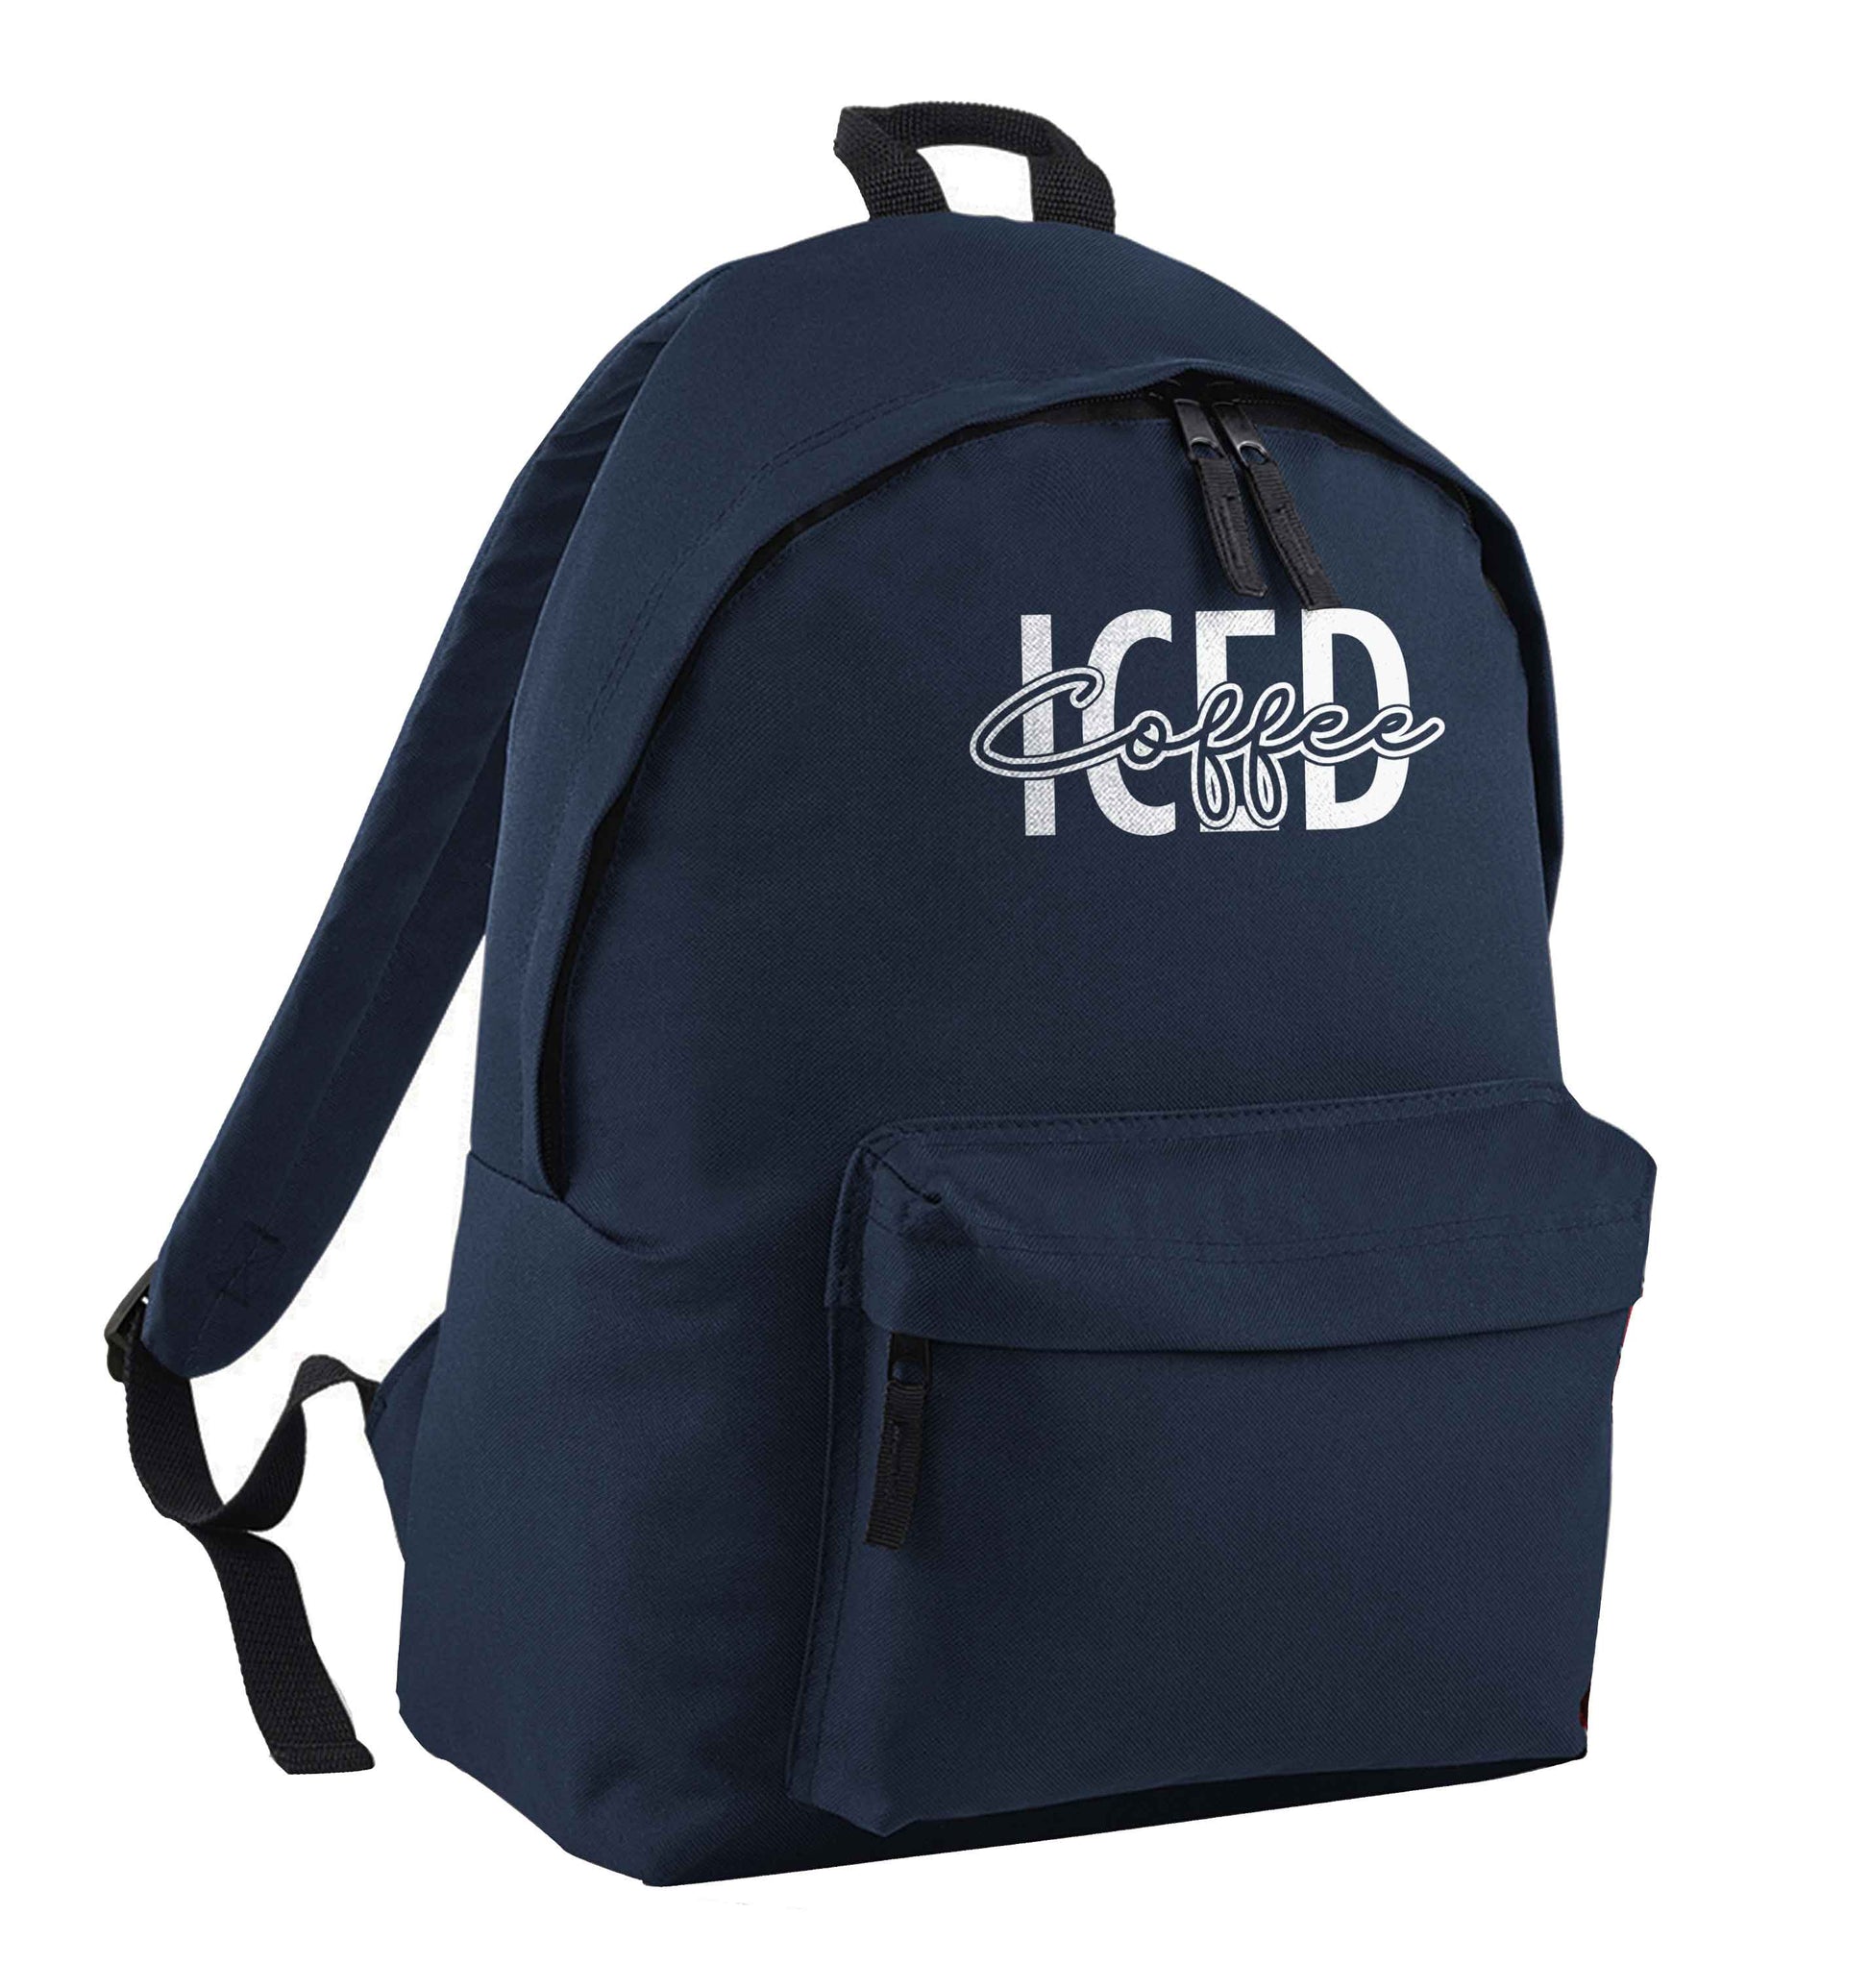 Iced Coffee navy adults backpack